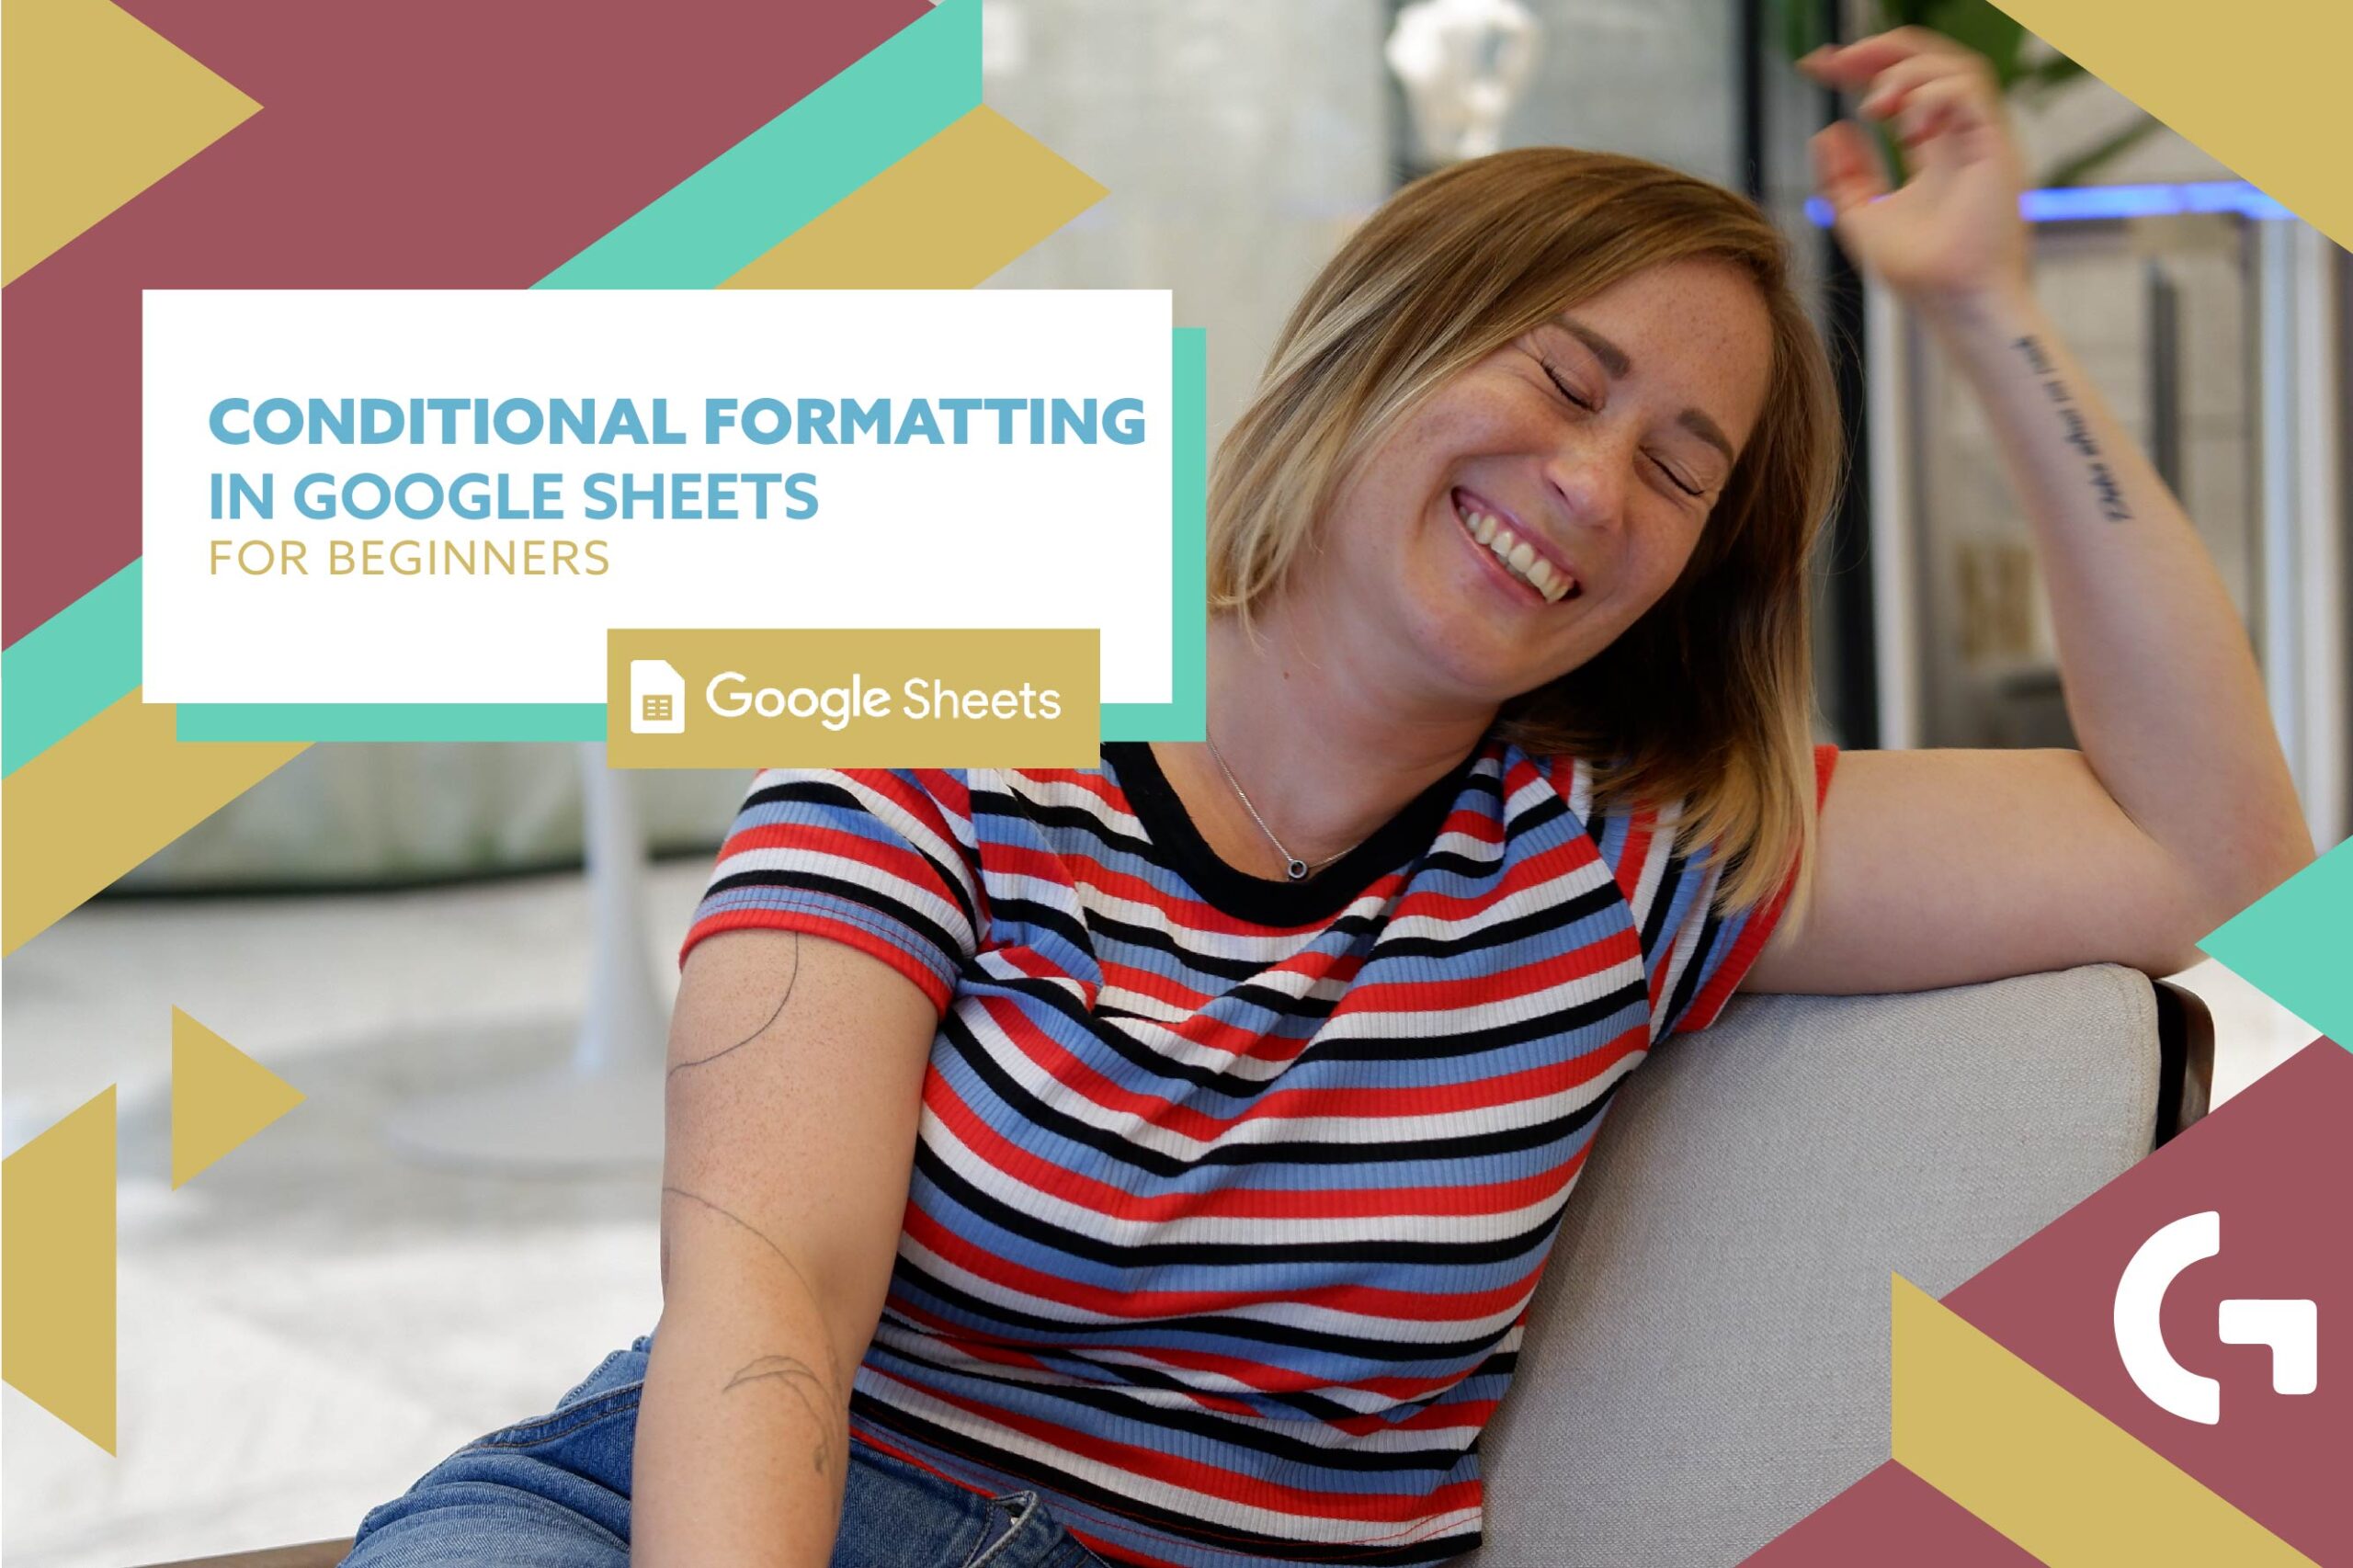 Conditional formatting in Google Sheets for beginners